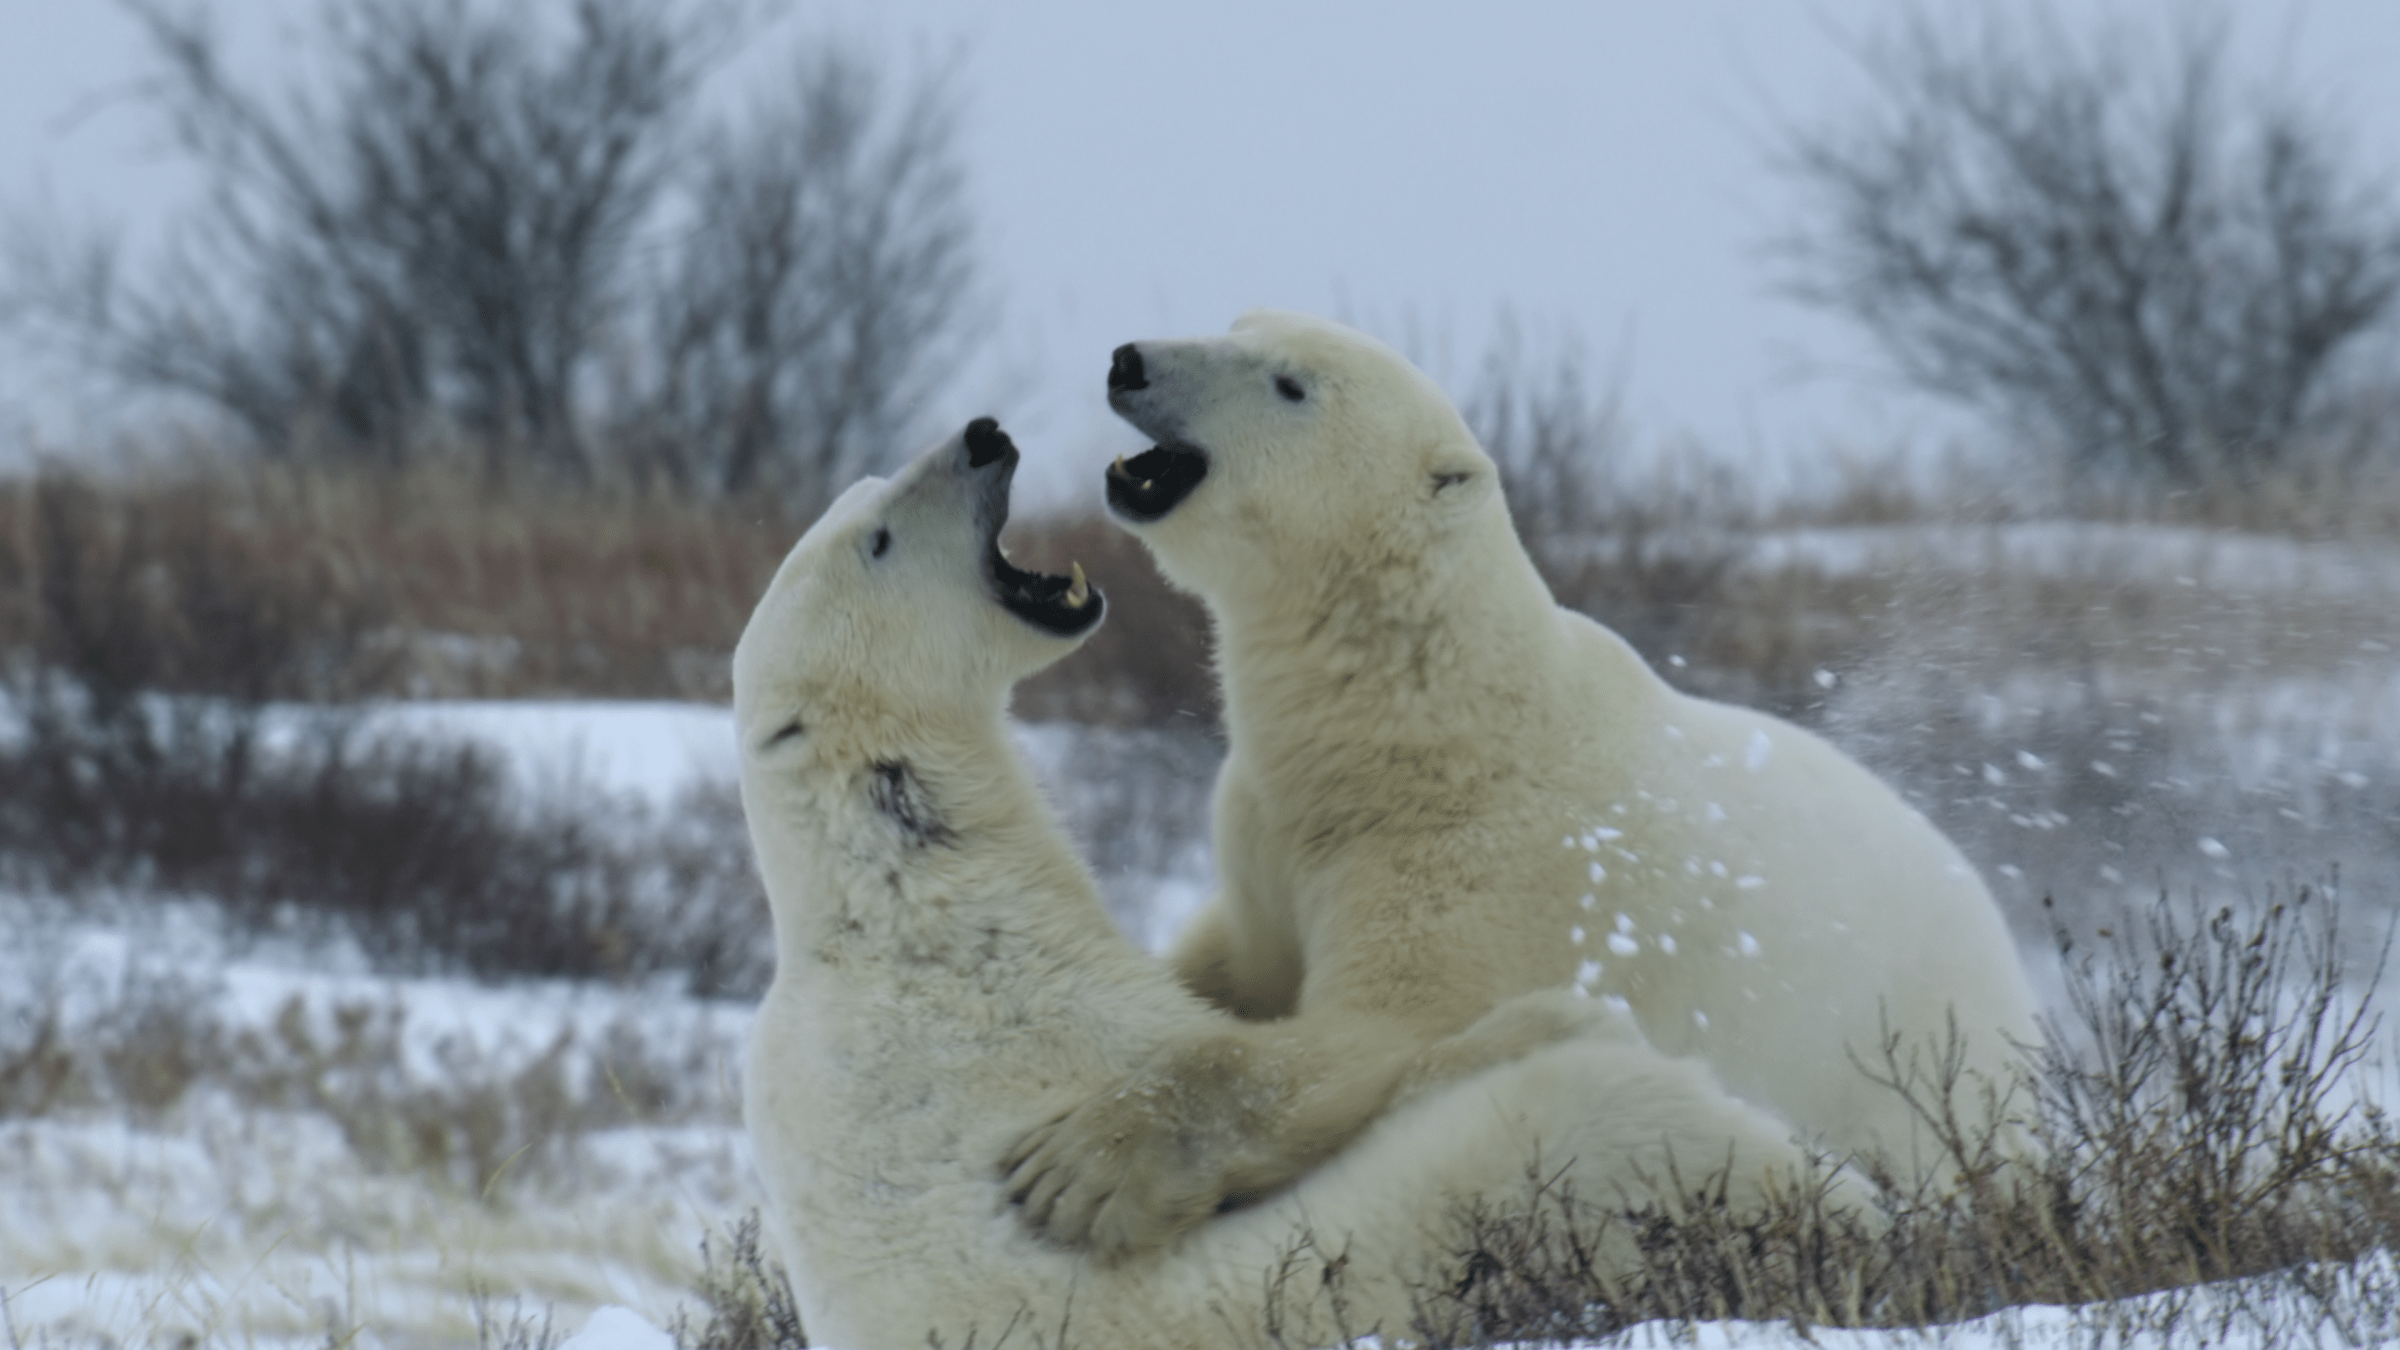 Polar bears in the new Netflix nature series Our Living World